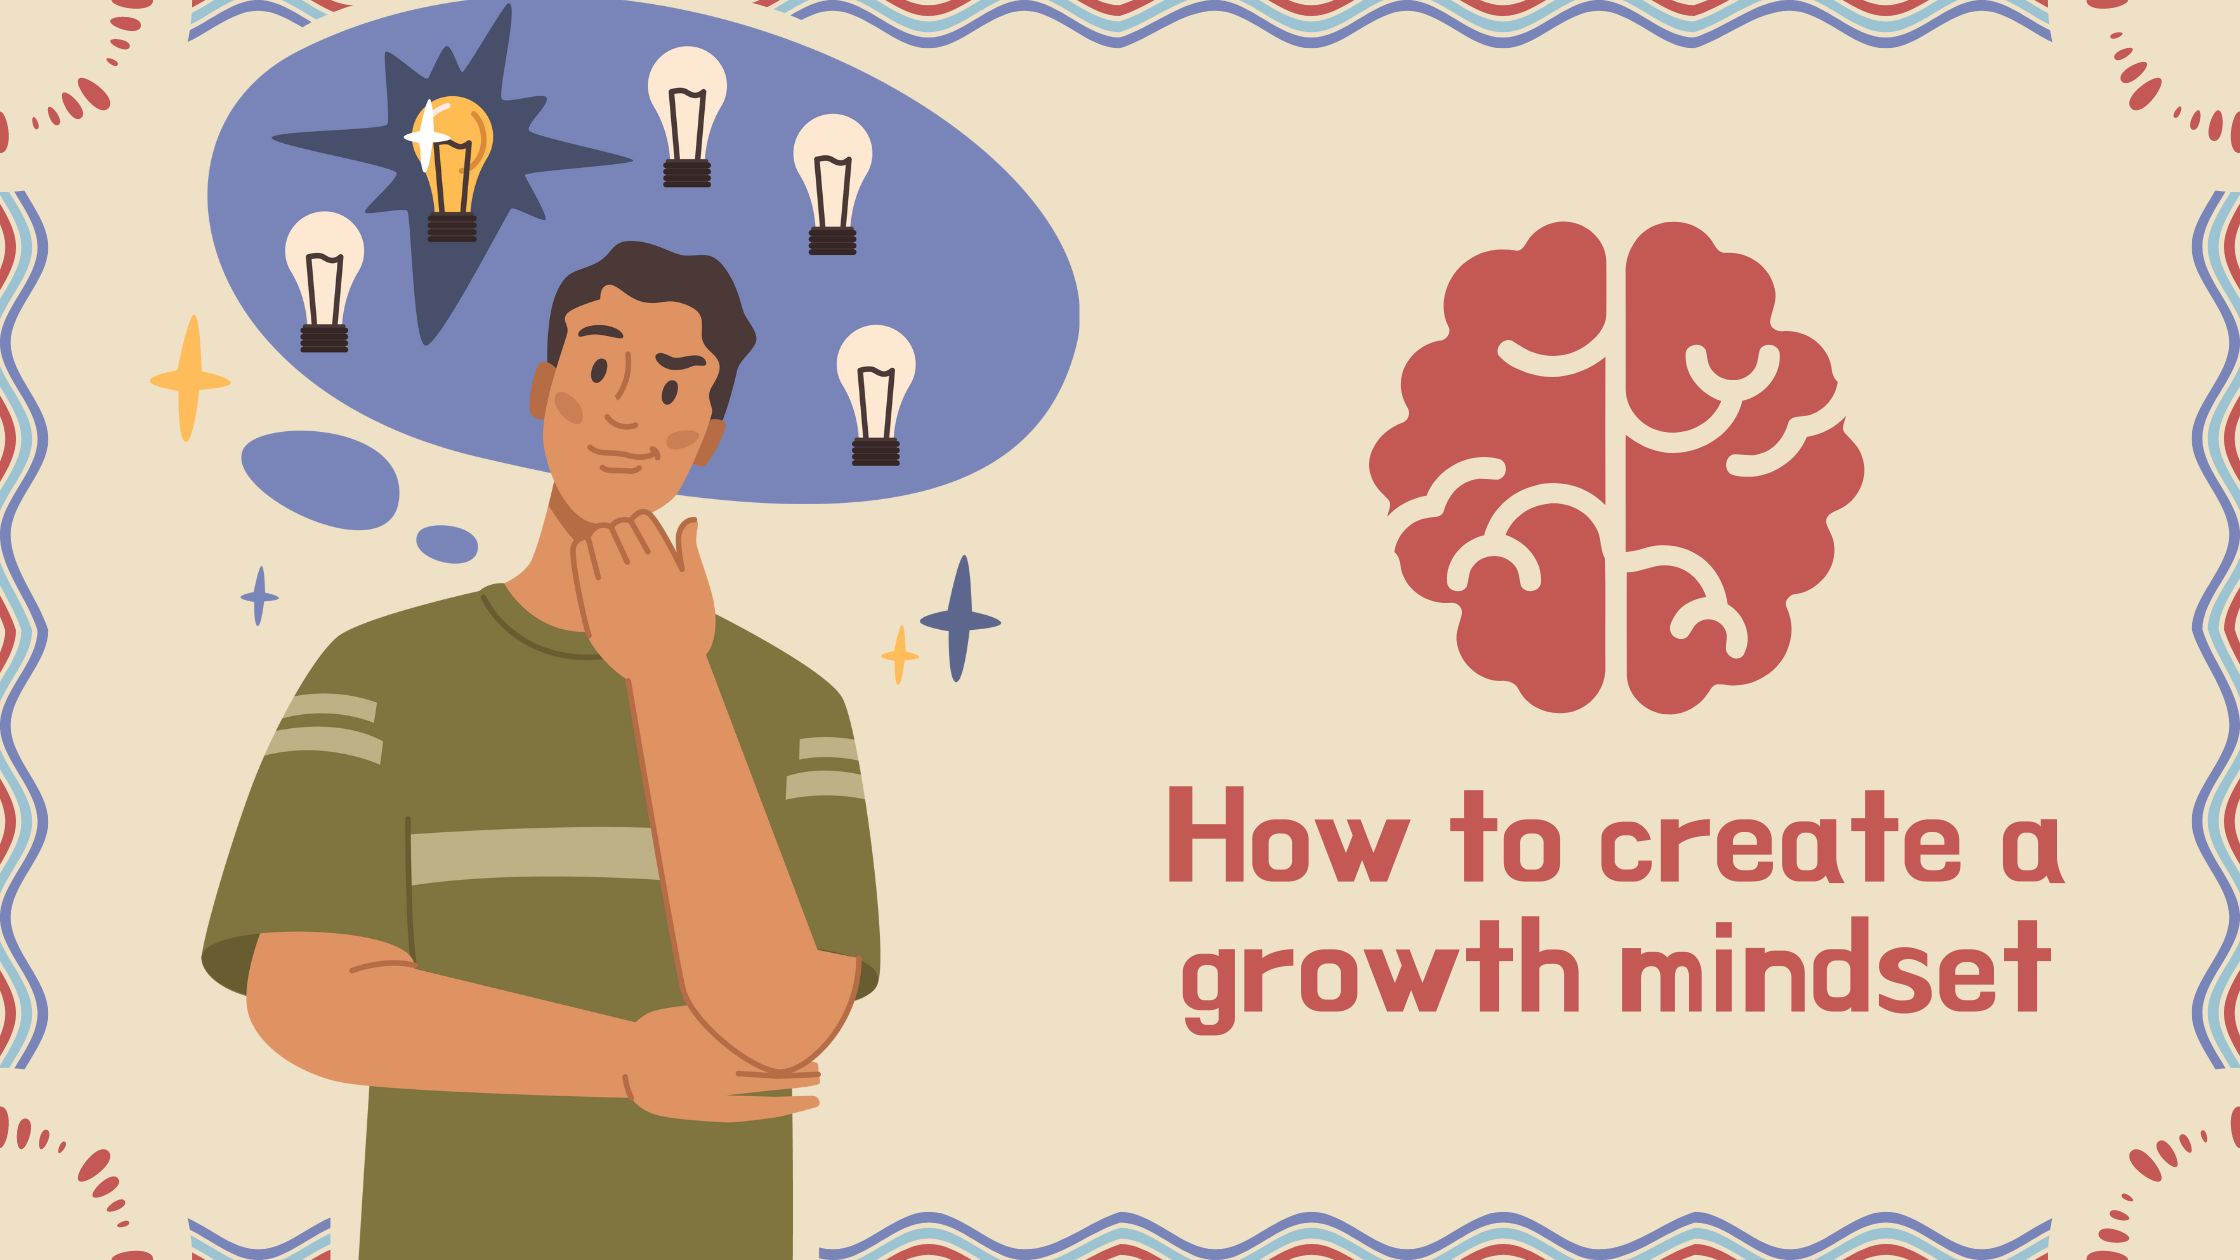 How to create a growth mindset